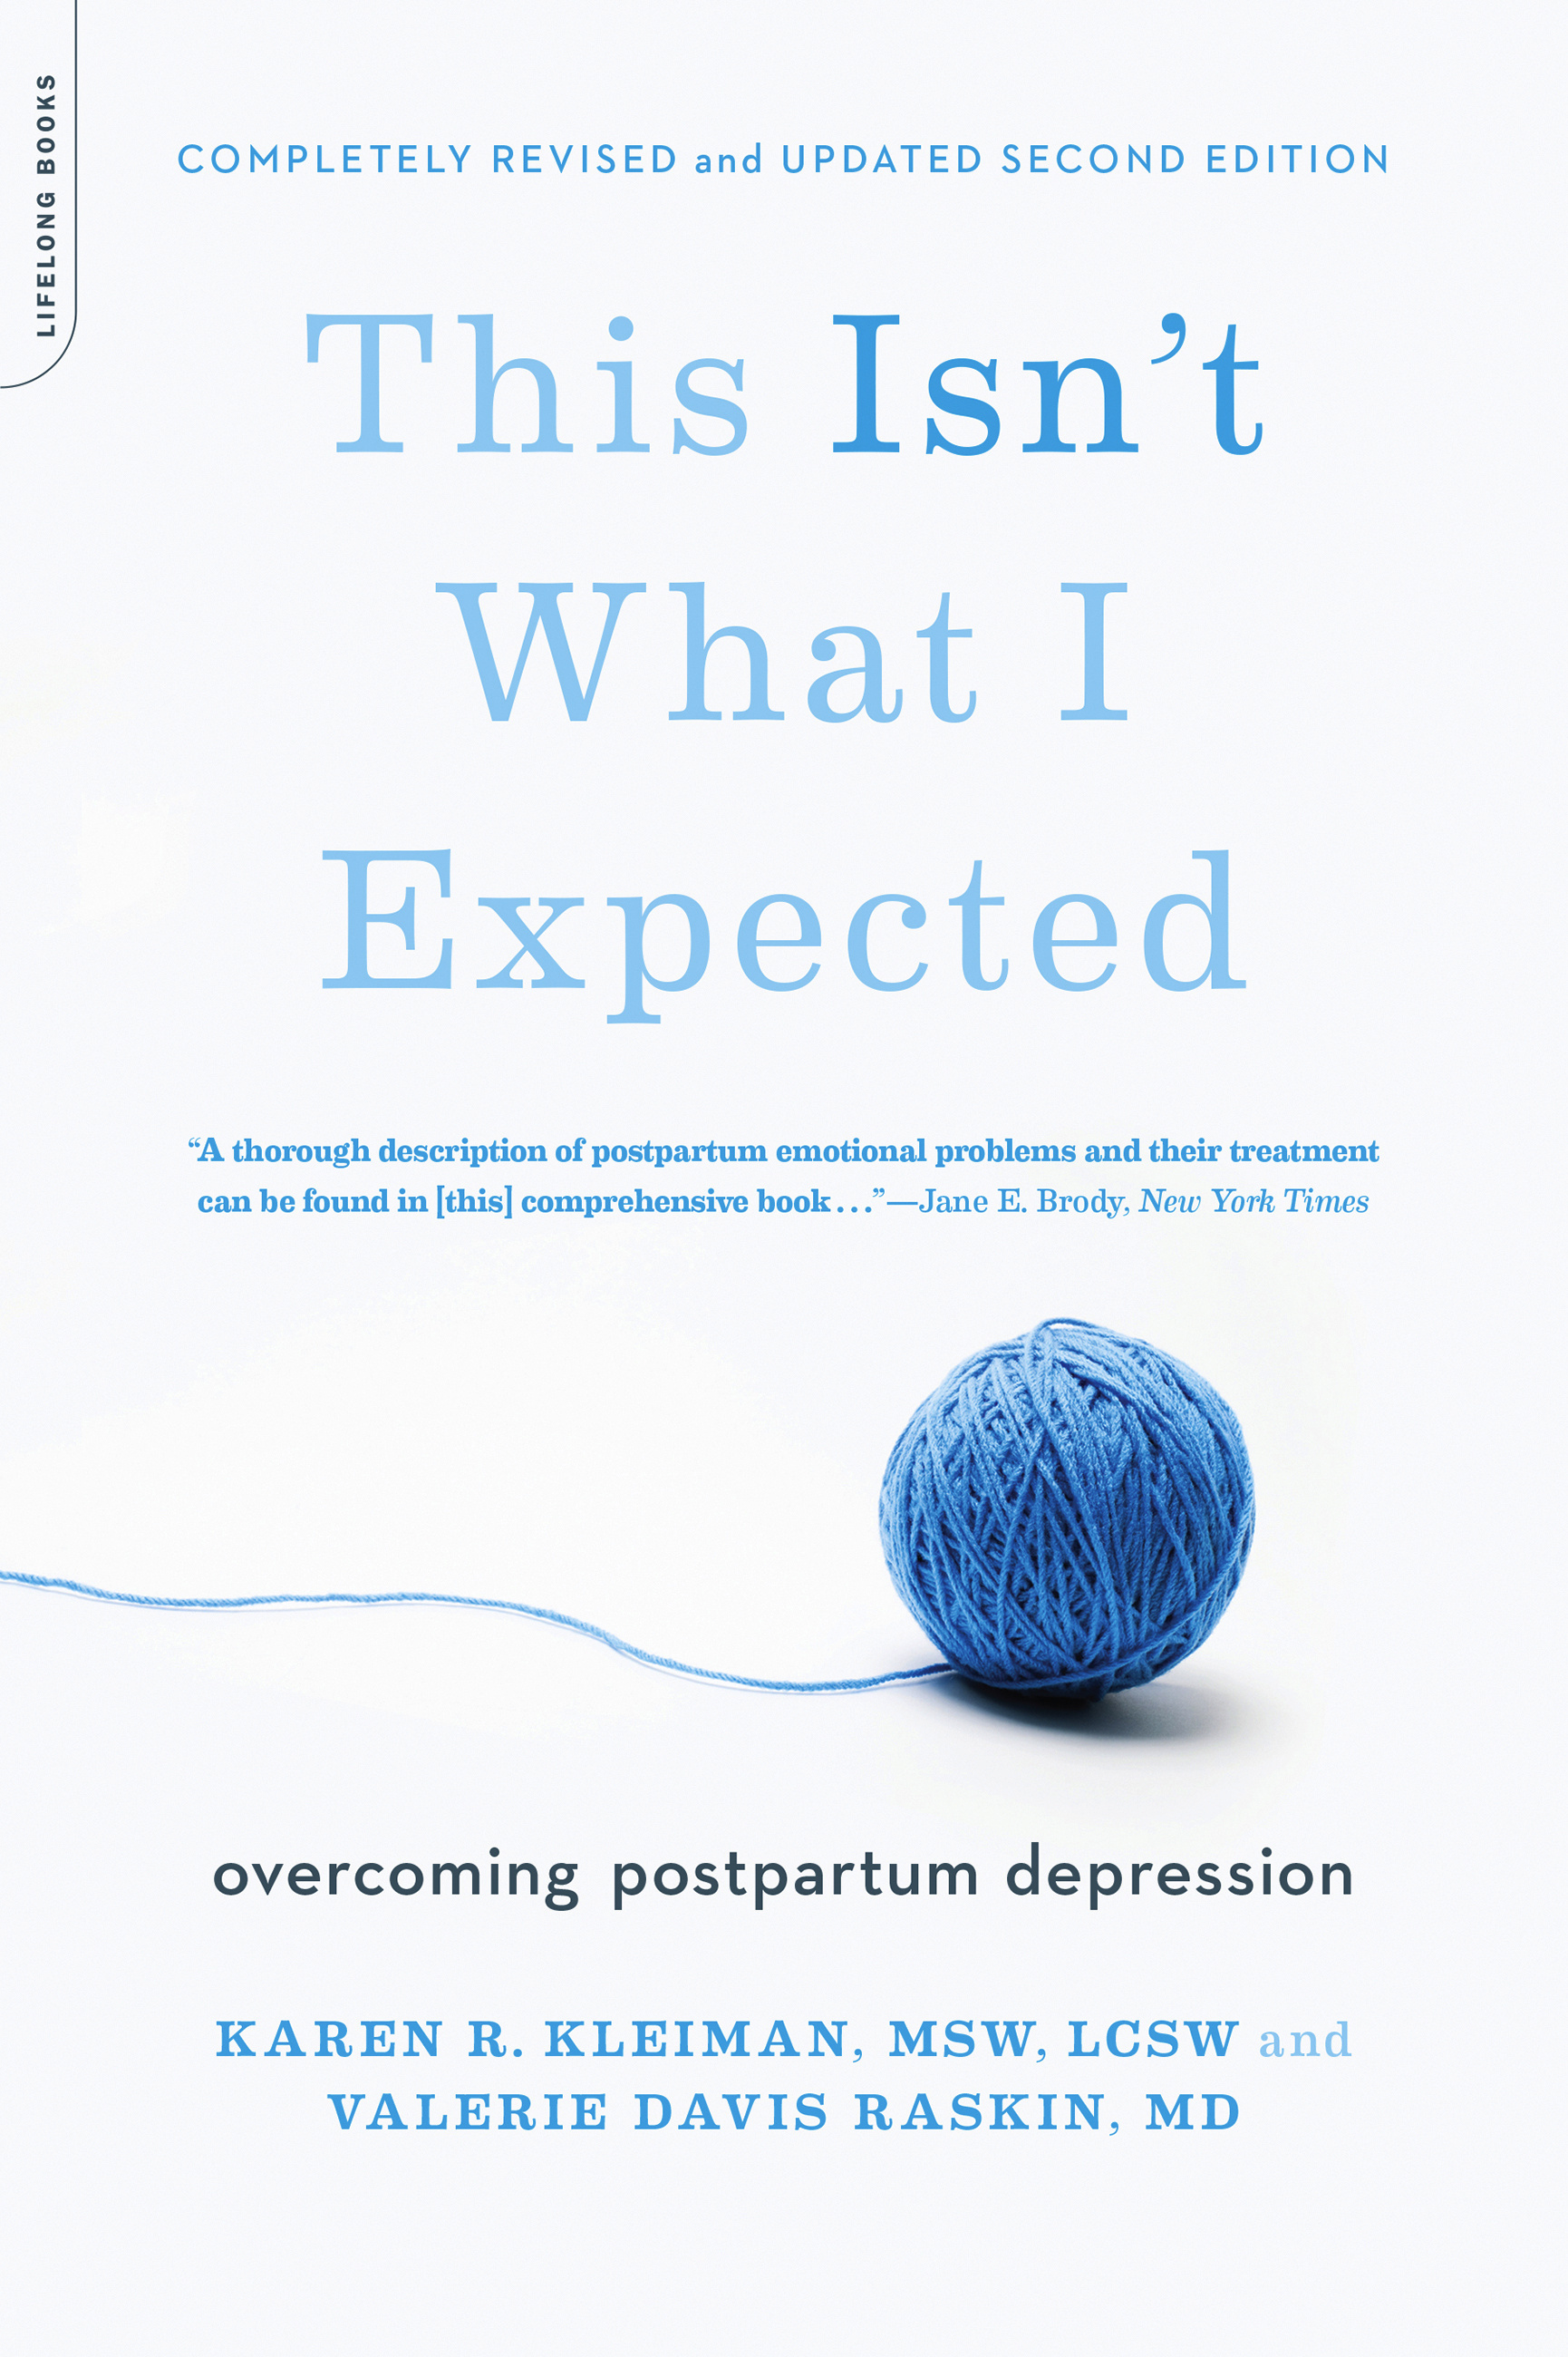 This Isn't What I Expected by Karen R. Kleiman | Hachette Book Group